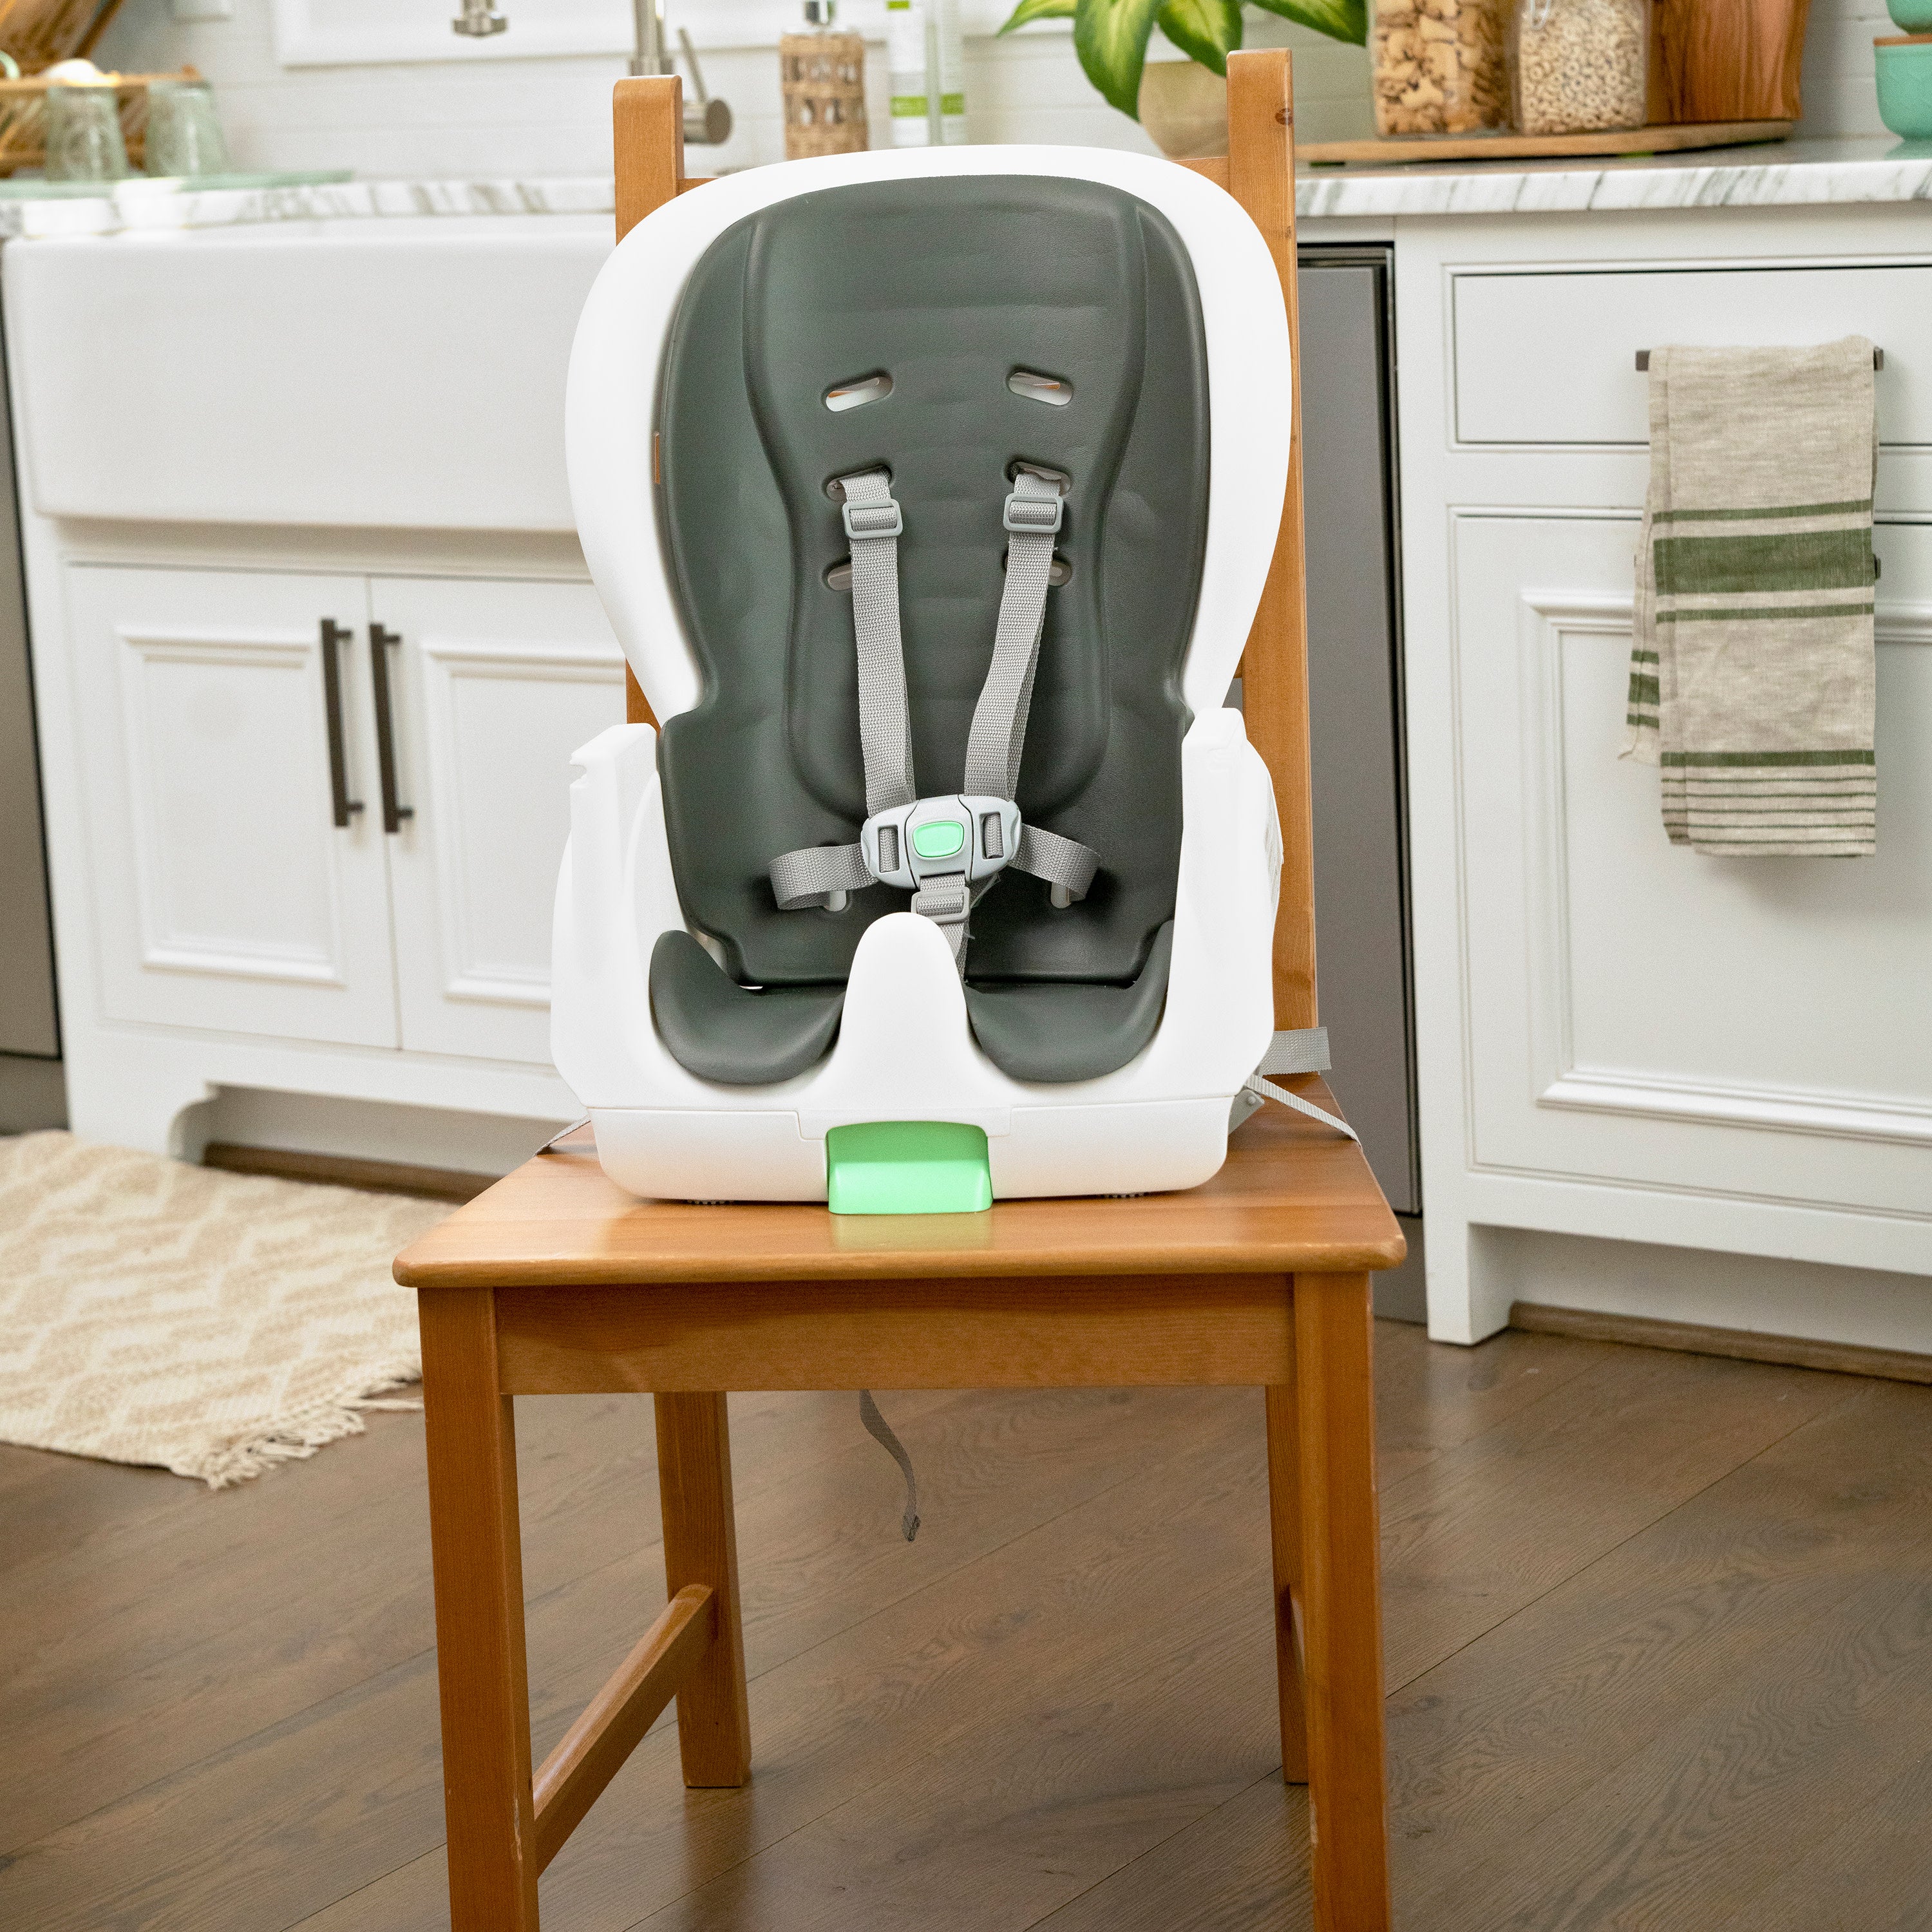  Ingenuity SmartClean Toddler Booster Seat - Slate (Item may  slightly vary) : Baby